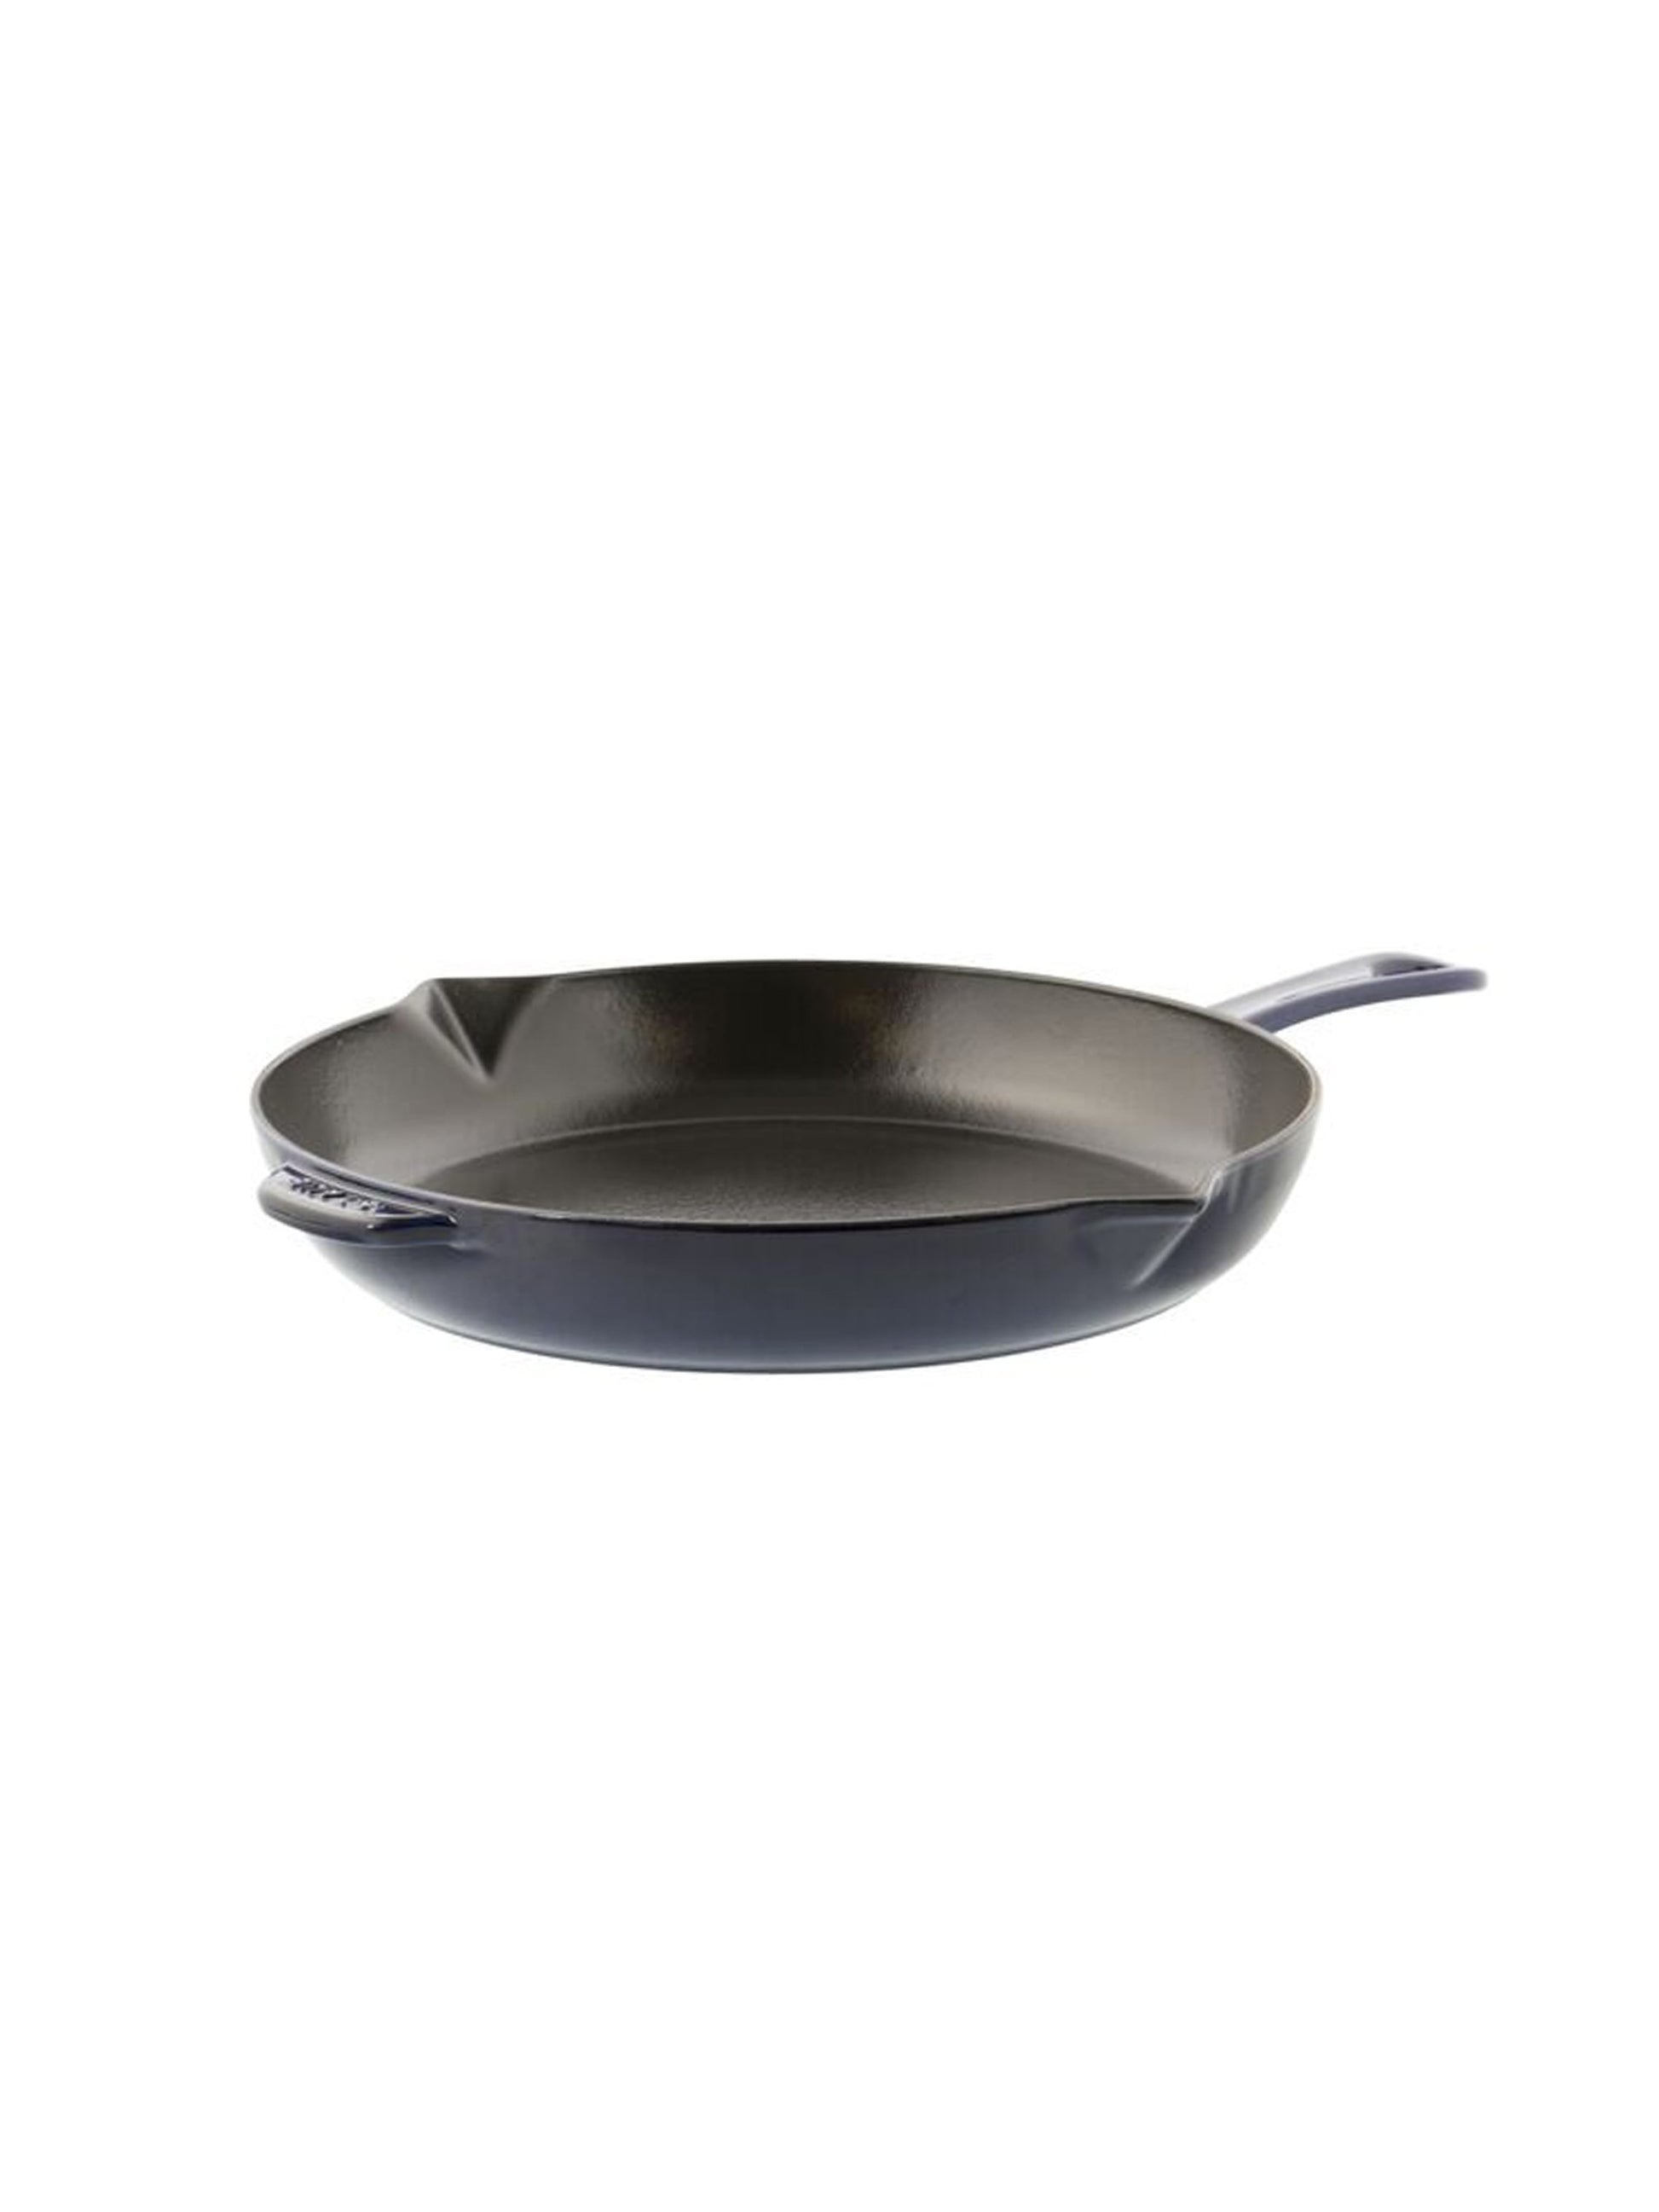 Buy Staub Cast Iron - Fry Pans/ Skillets Frying pan with pouring spout